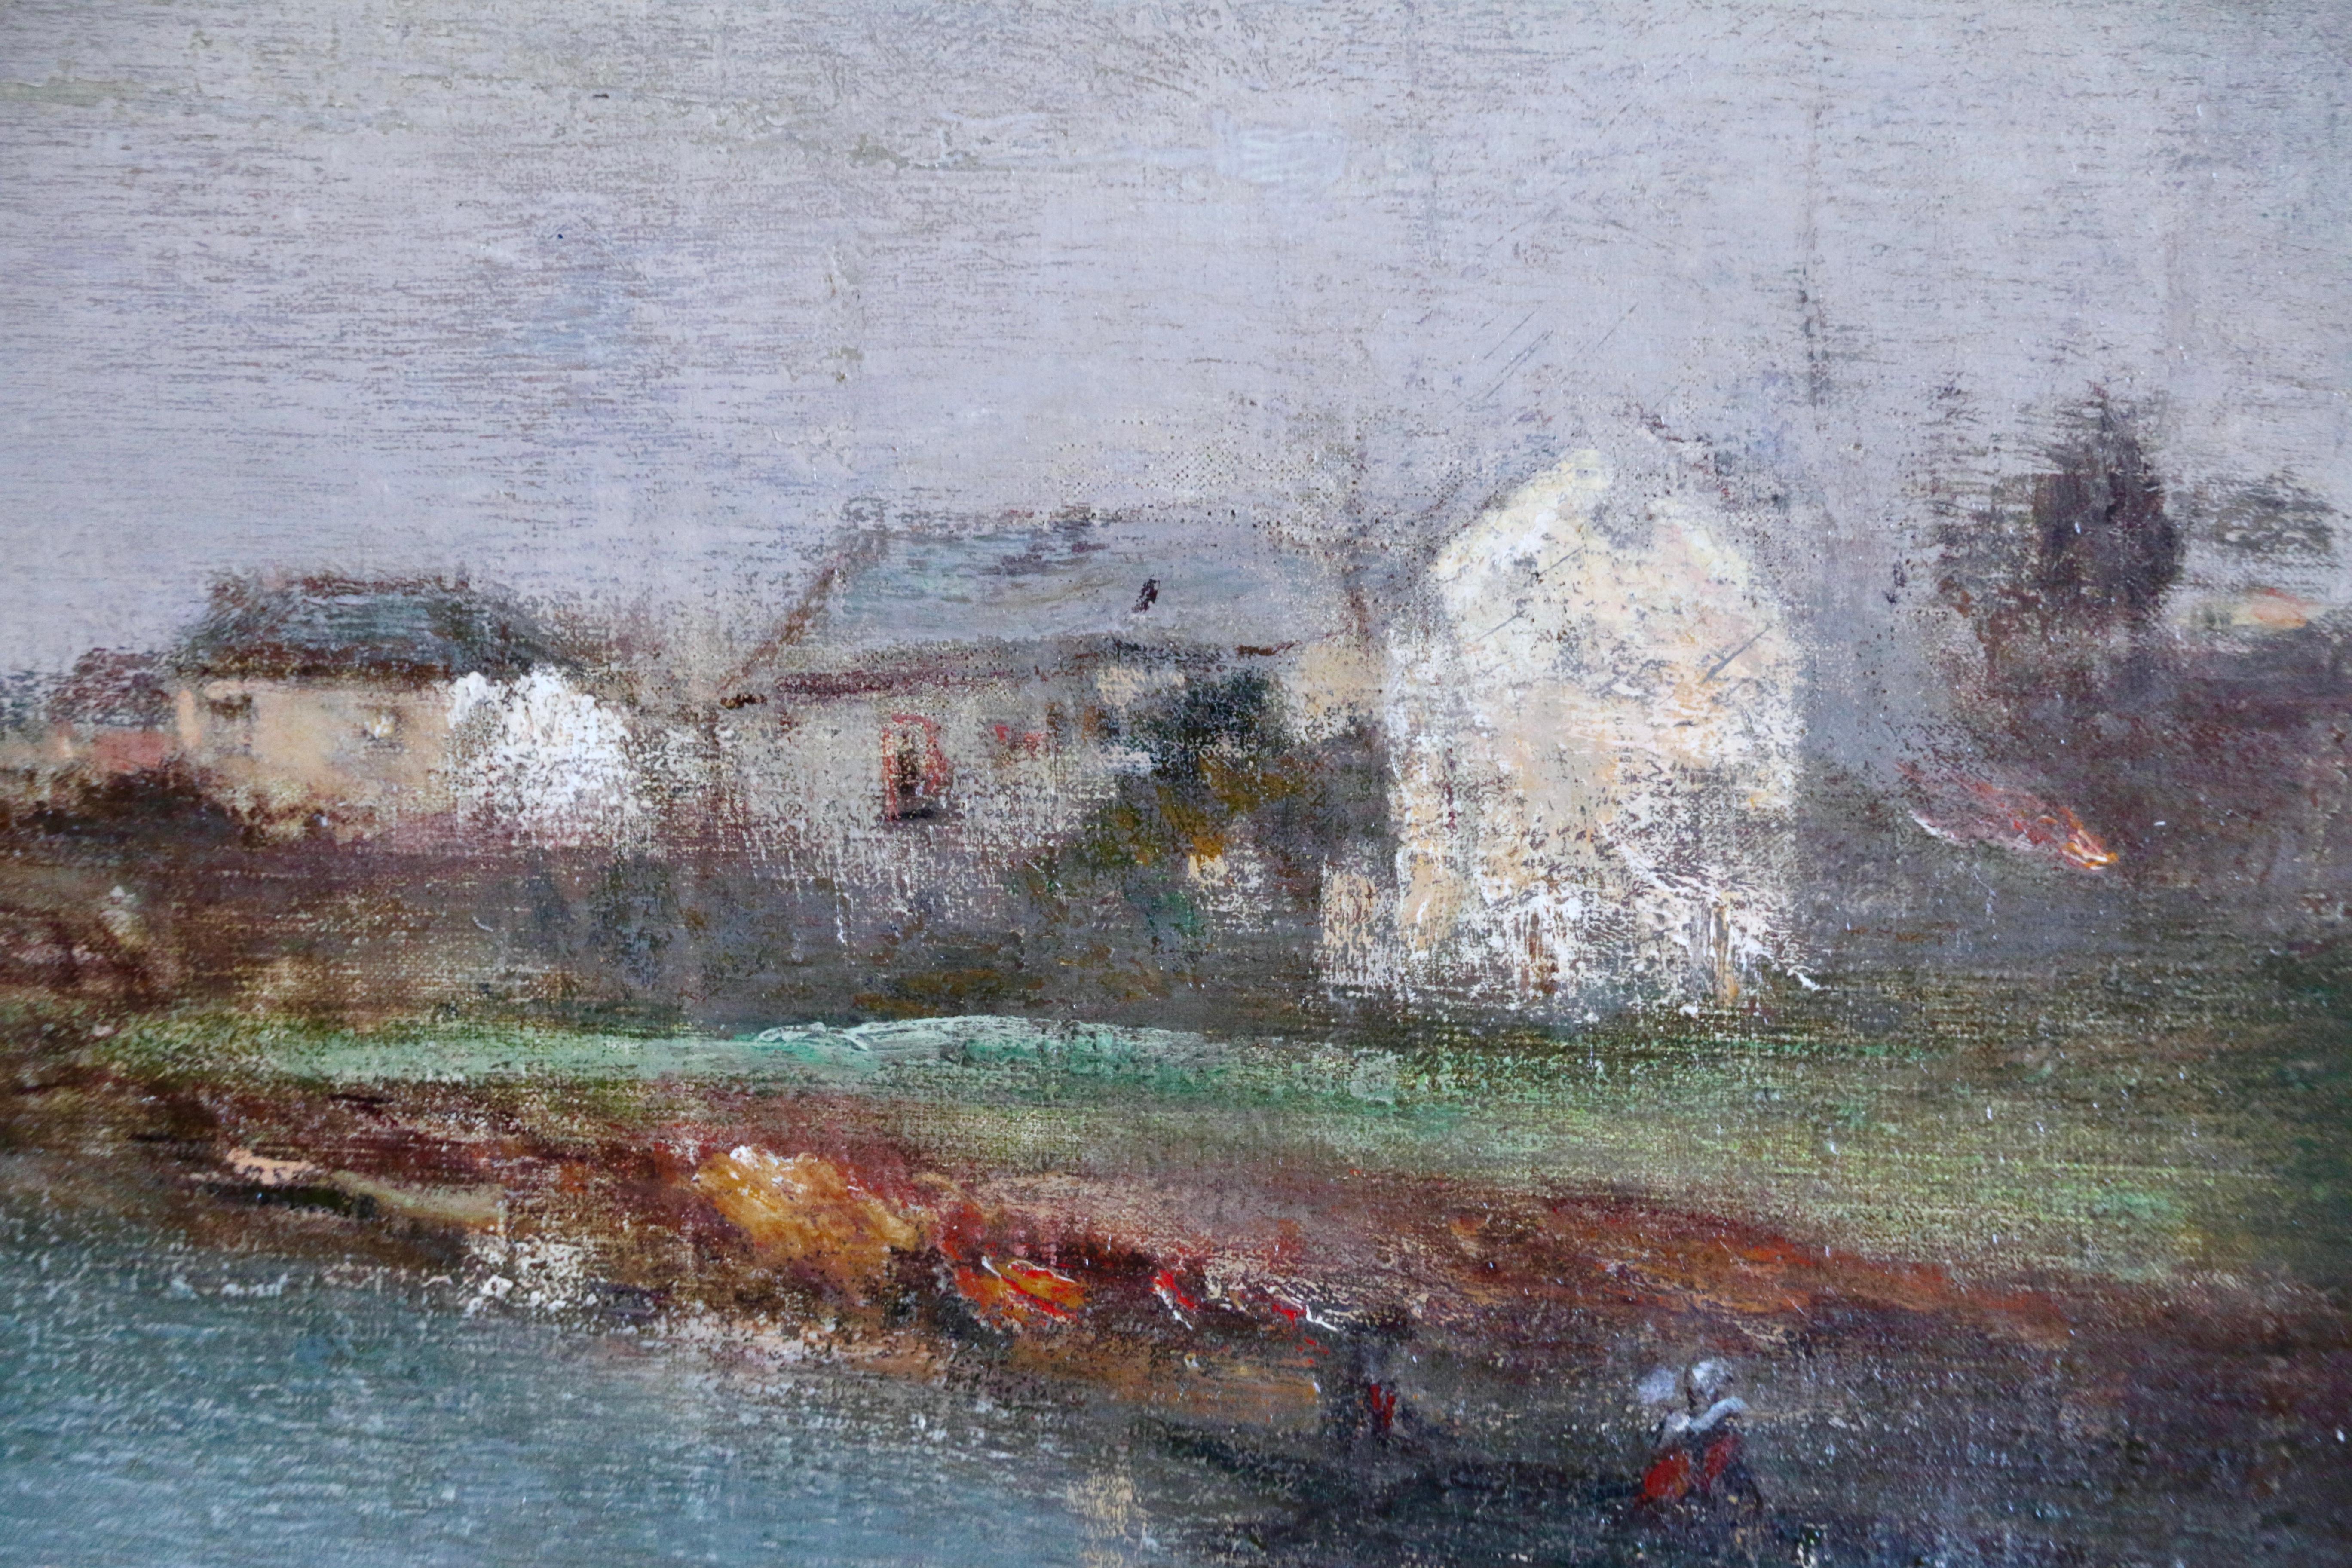 On the River - 19th Century Oil, Cottages by Boats on a River by Raffaelli - Impressionist Painting by Jean-Francois Raffaelli